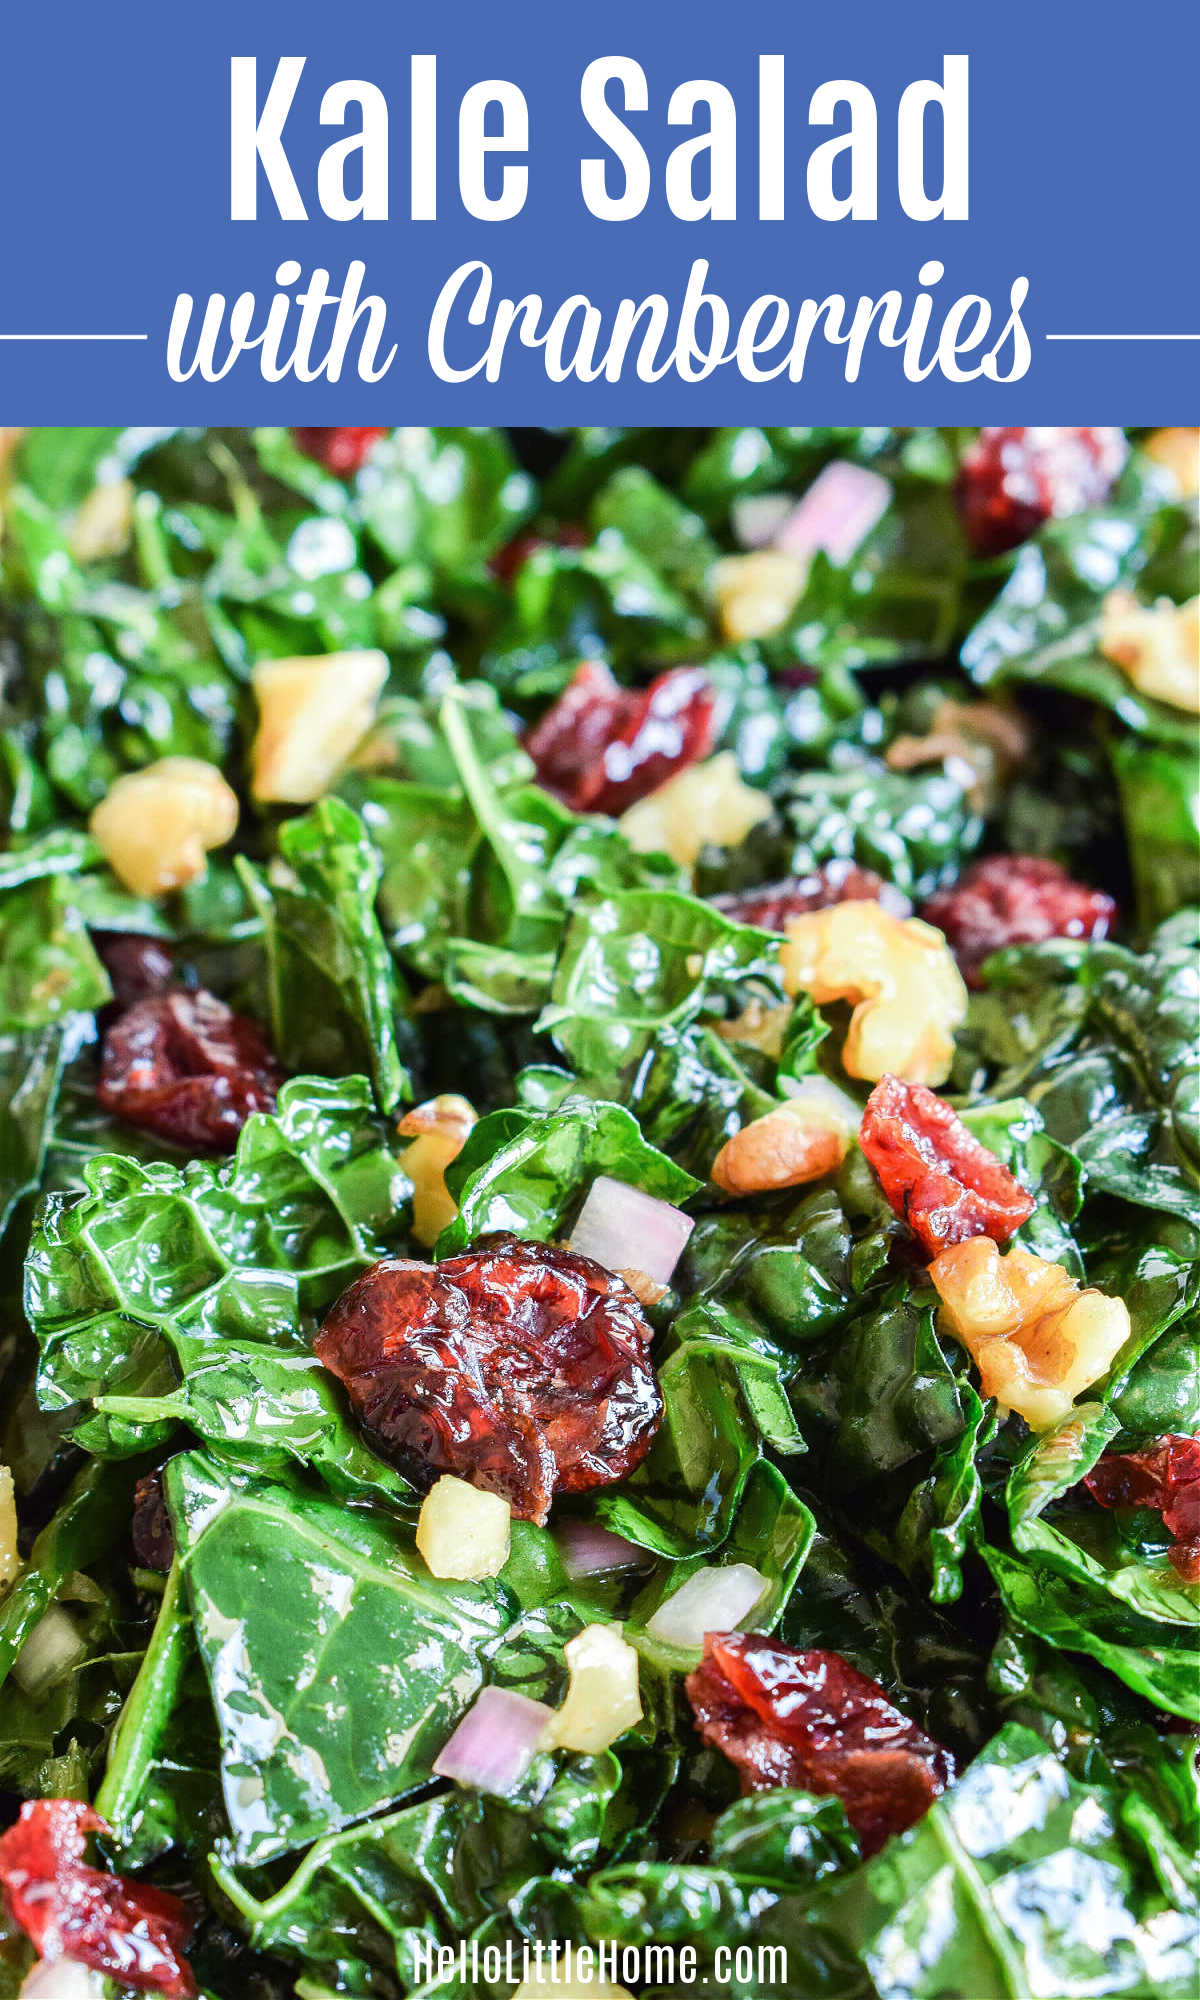 Closeup of Kale Salad with Cranberries and Walnuts.